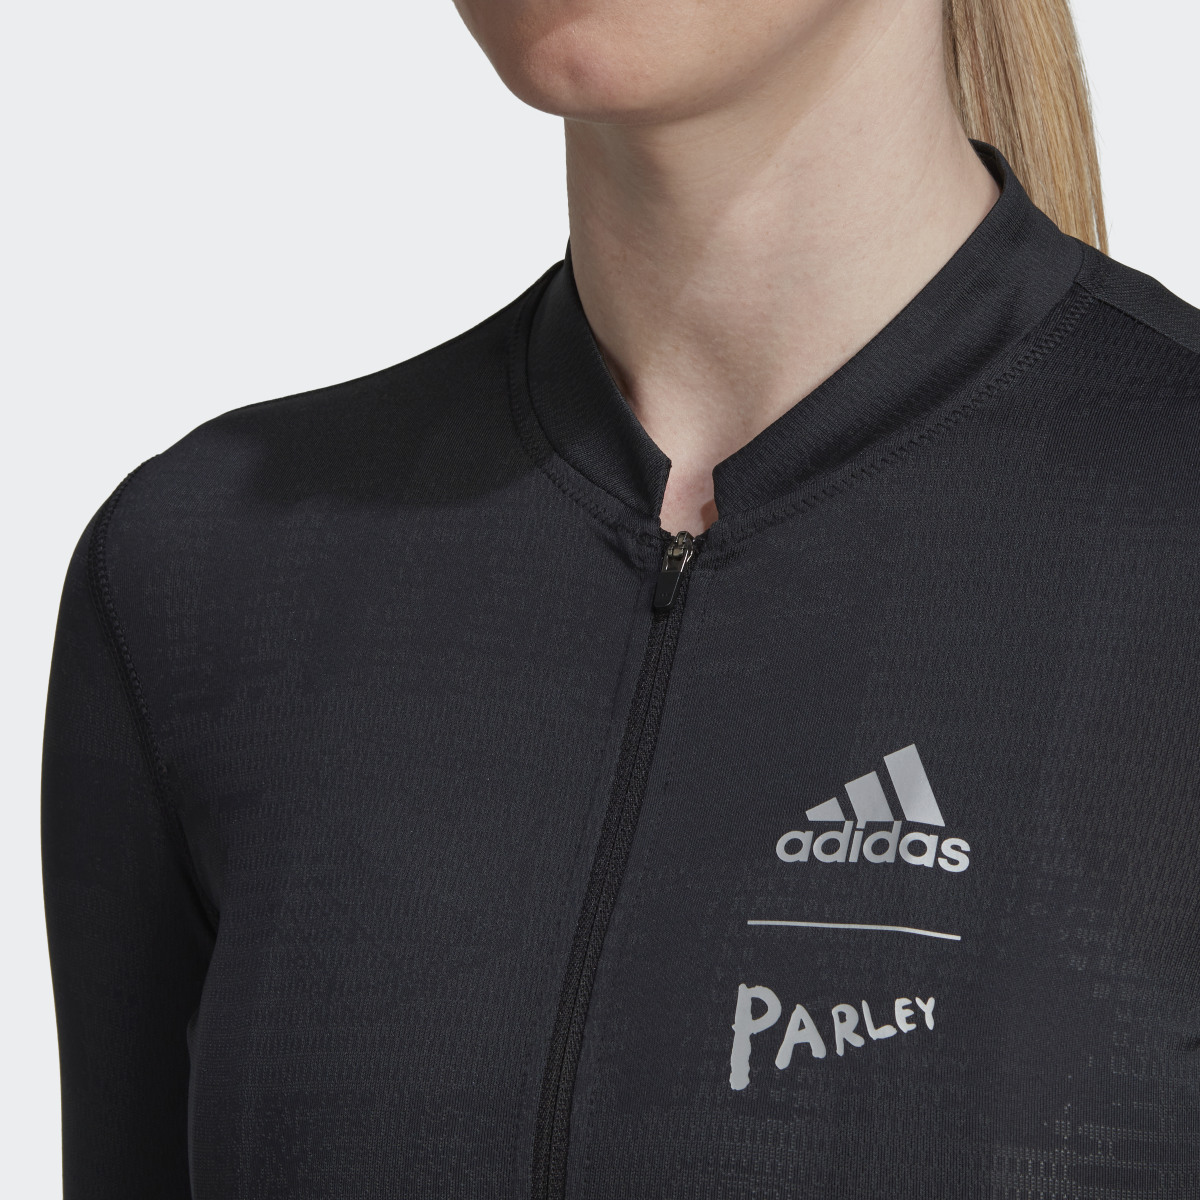 Adidas The Parley Short Sleeve Cycling Jersey. 8